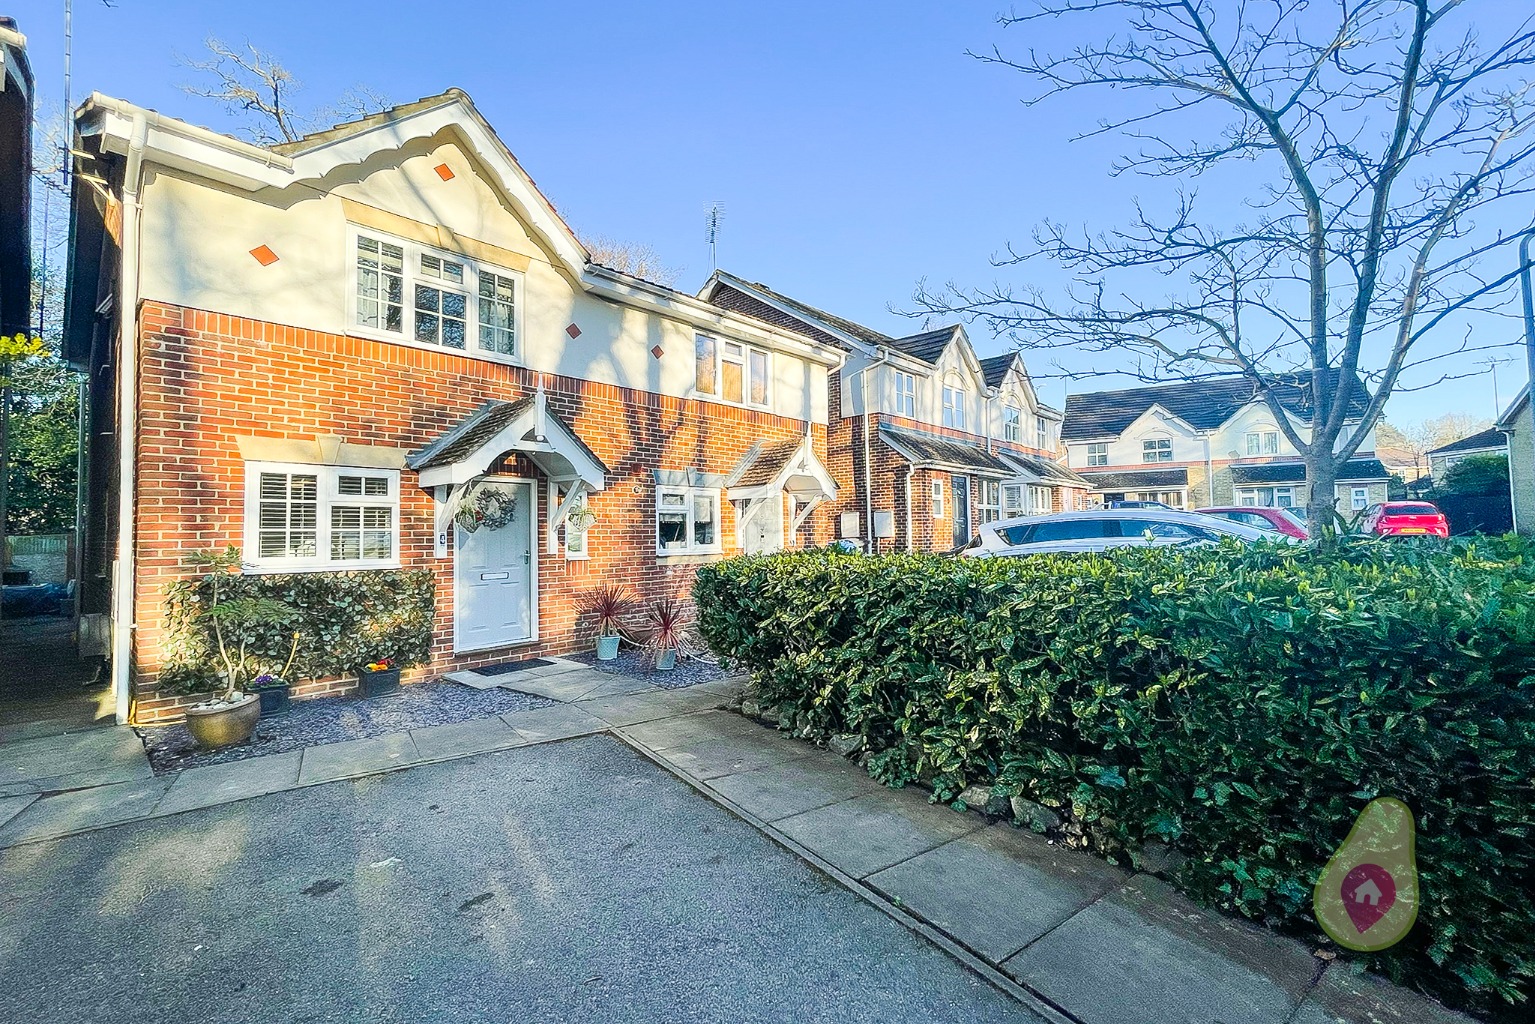 A beautifully presented starter home, nestled into a tranquil location within North Ascot and within walking distance of local shops, schools and nature reserves. Two double bedrooms, off-street parking, large rooms and a low-maintenance garden make this the perfect starter home.